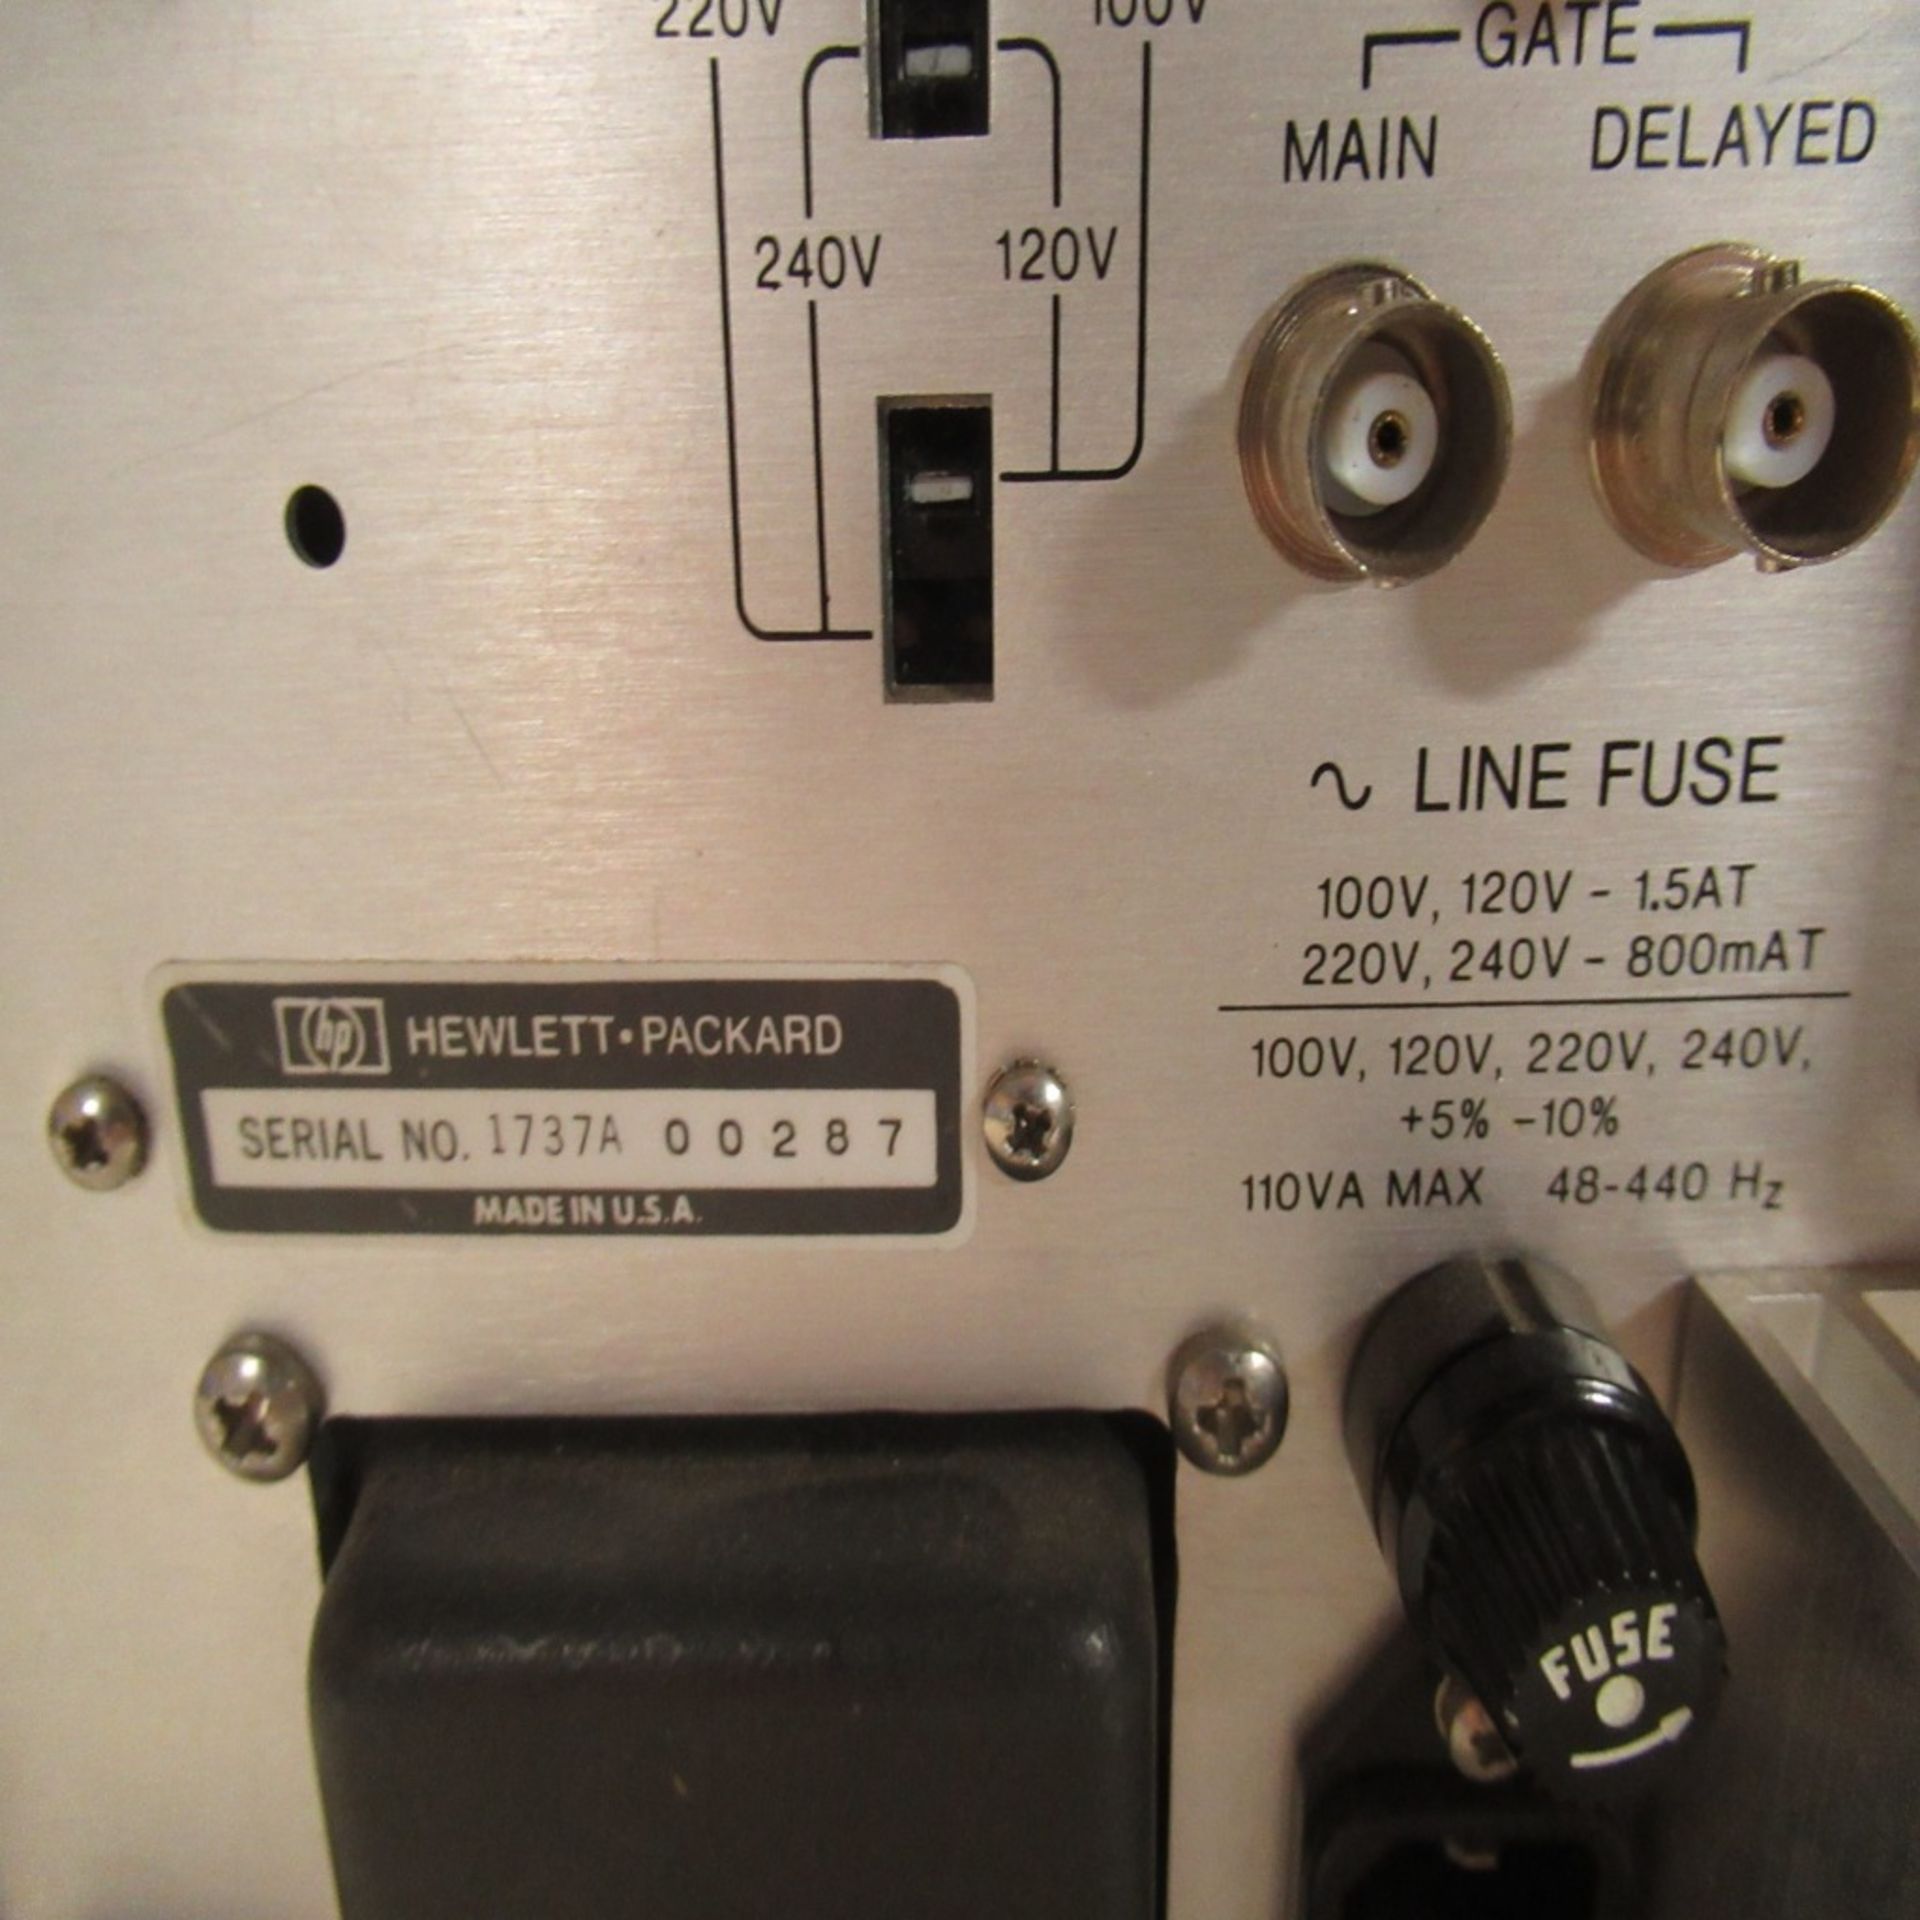 PHOTON SNAP SHOT MODEL 6000 *POWERS ON* NO SCREEN DISPLAY; FARNELL AP20-80 REGULATED POWER SUPPLY * - Image 60 of 222